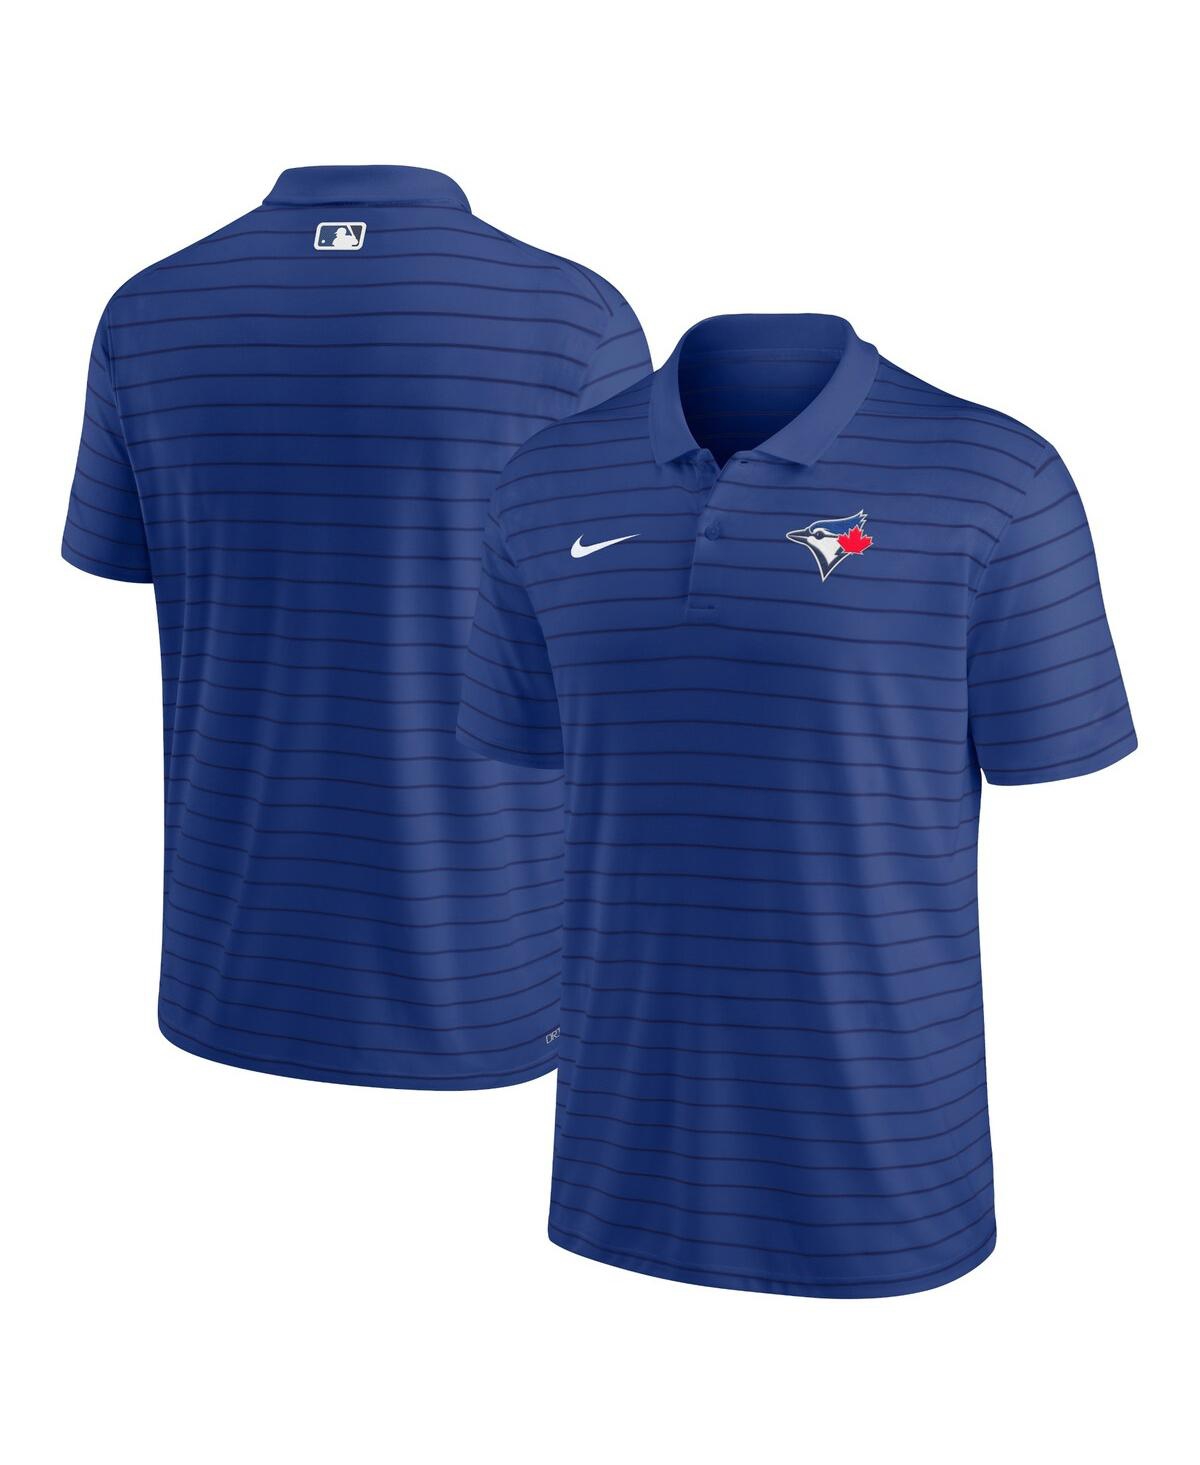 Nike Men's  Royal Toronto Blue Jays Authentic Collection Victory Striped Performance Polo Shirt